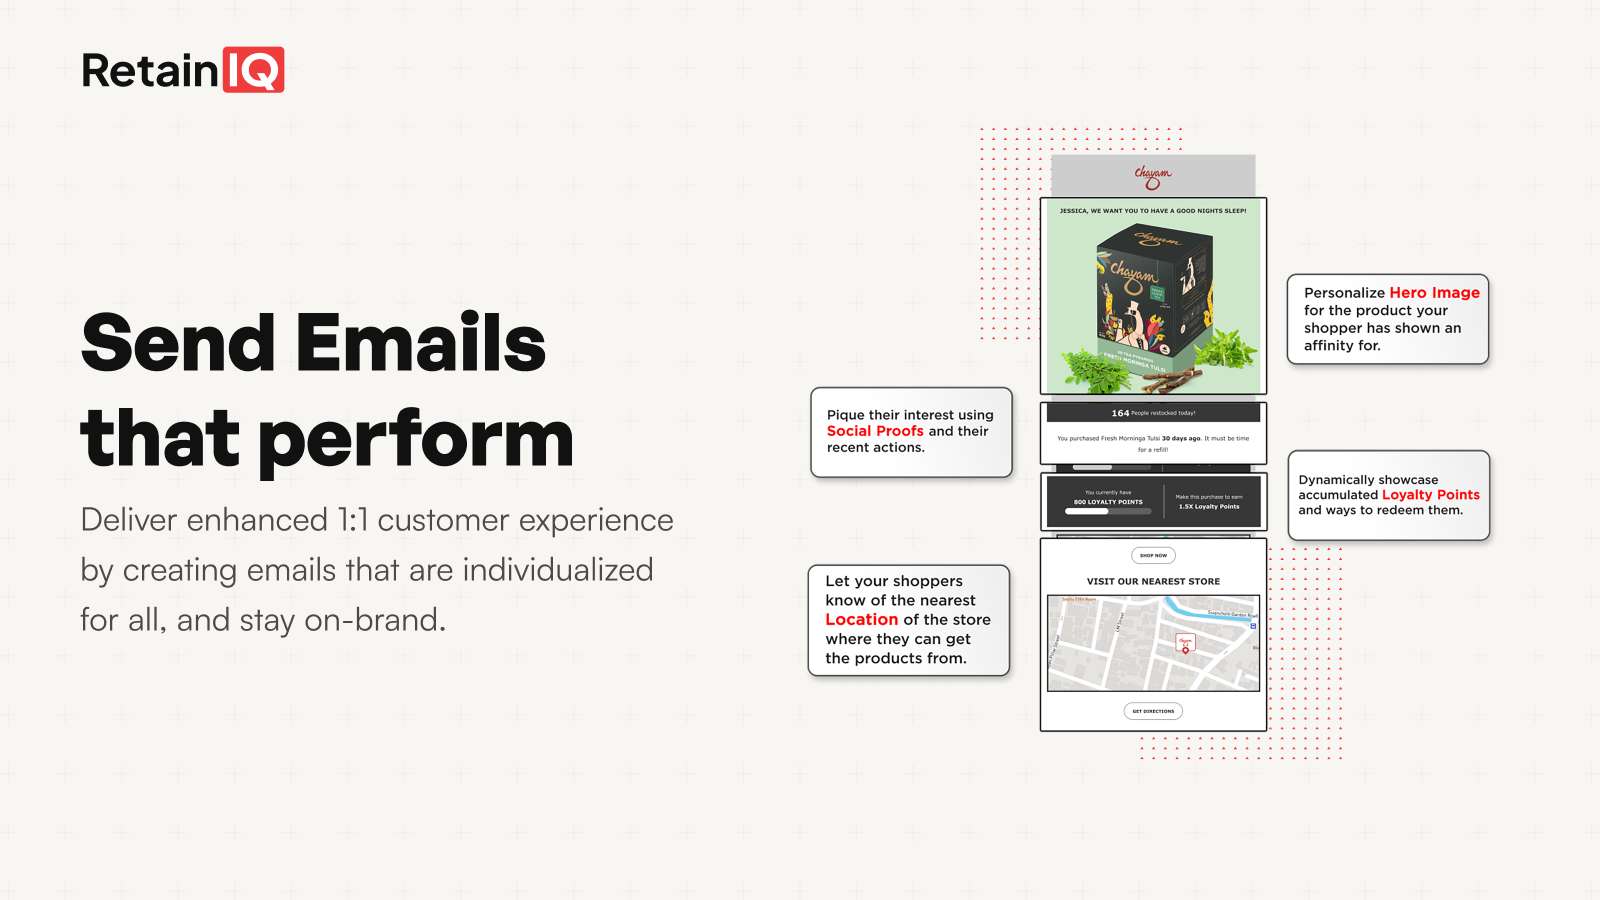 Send Emails that perform